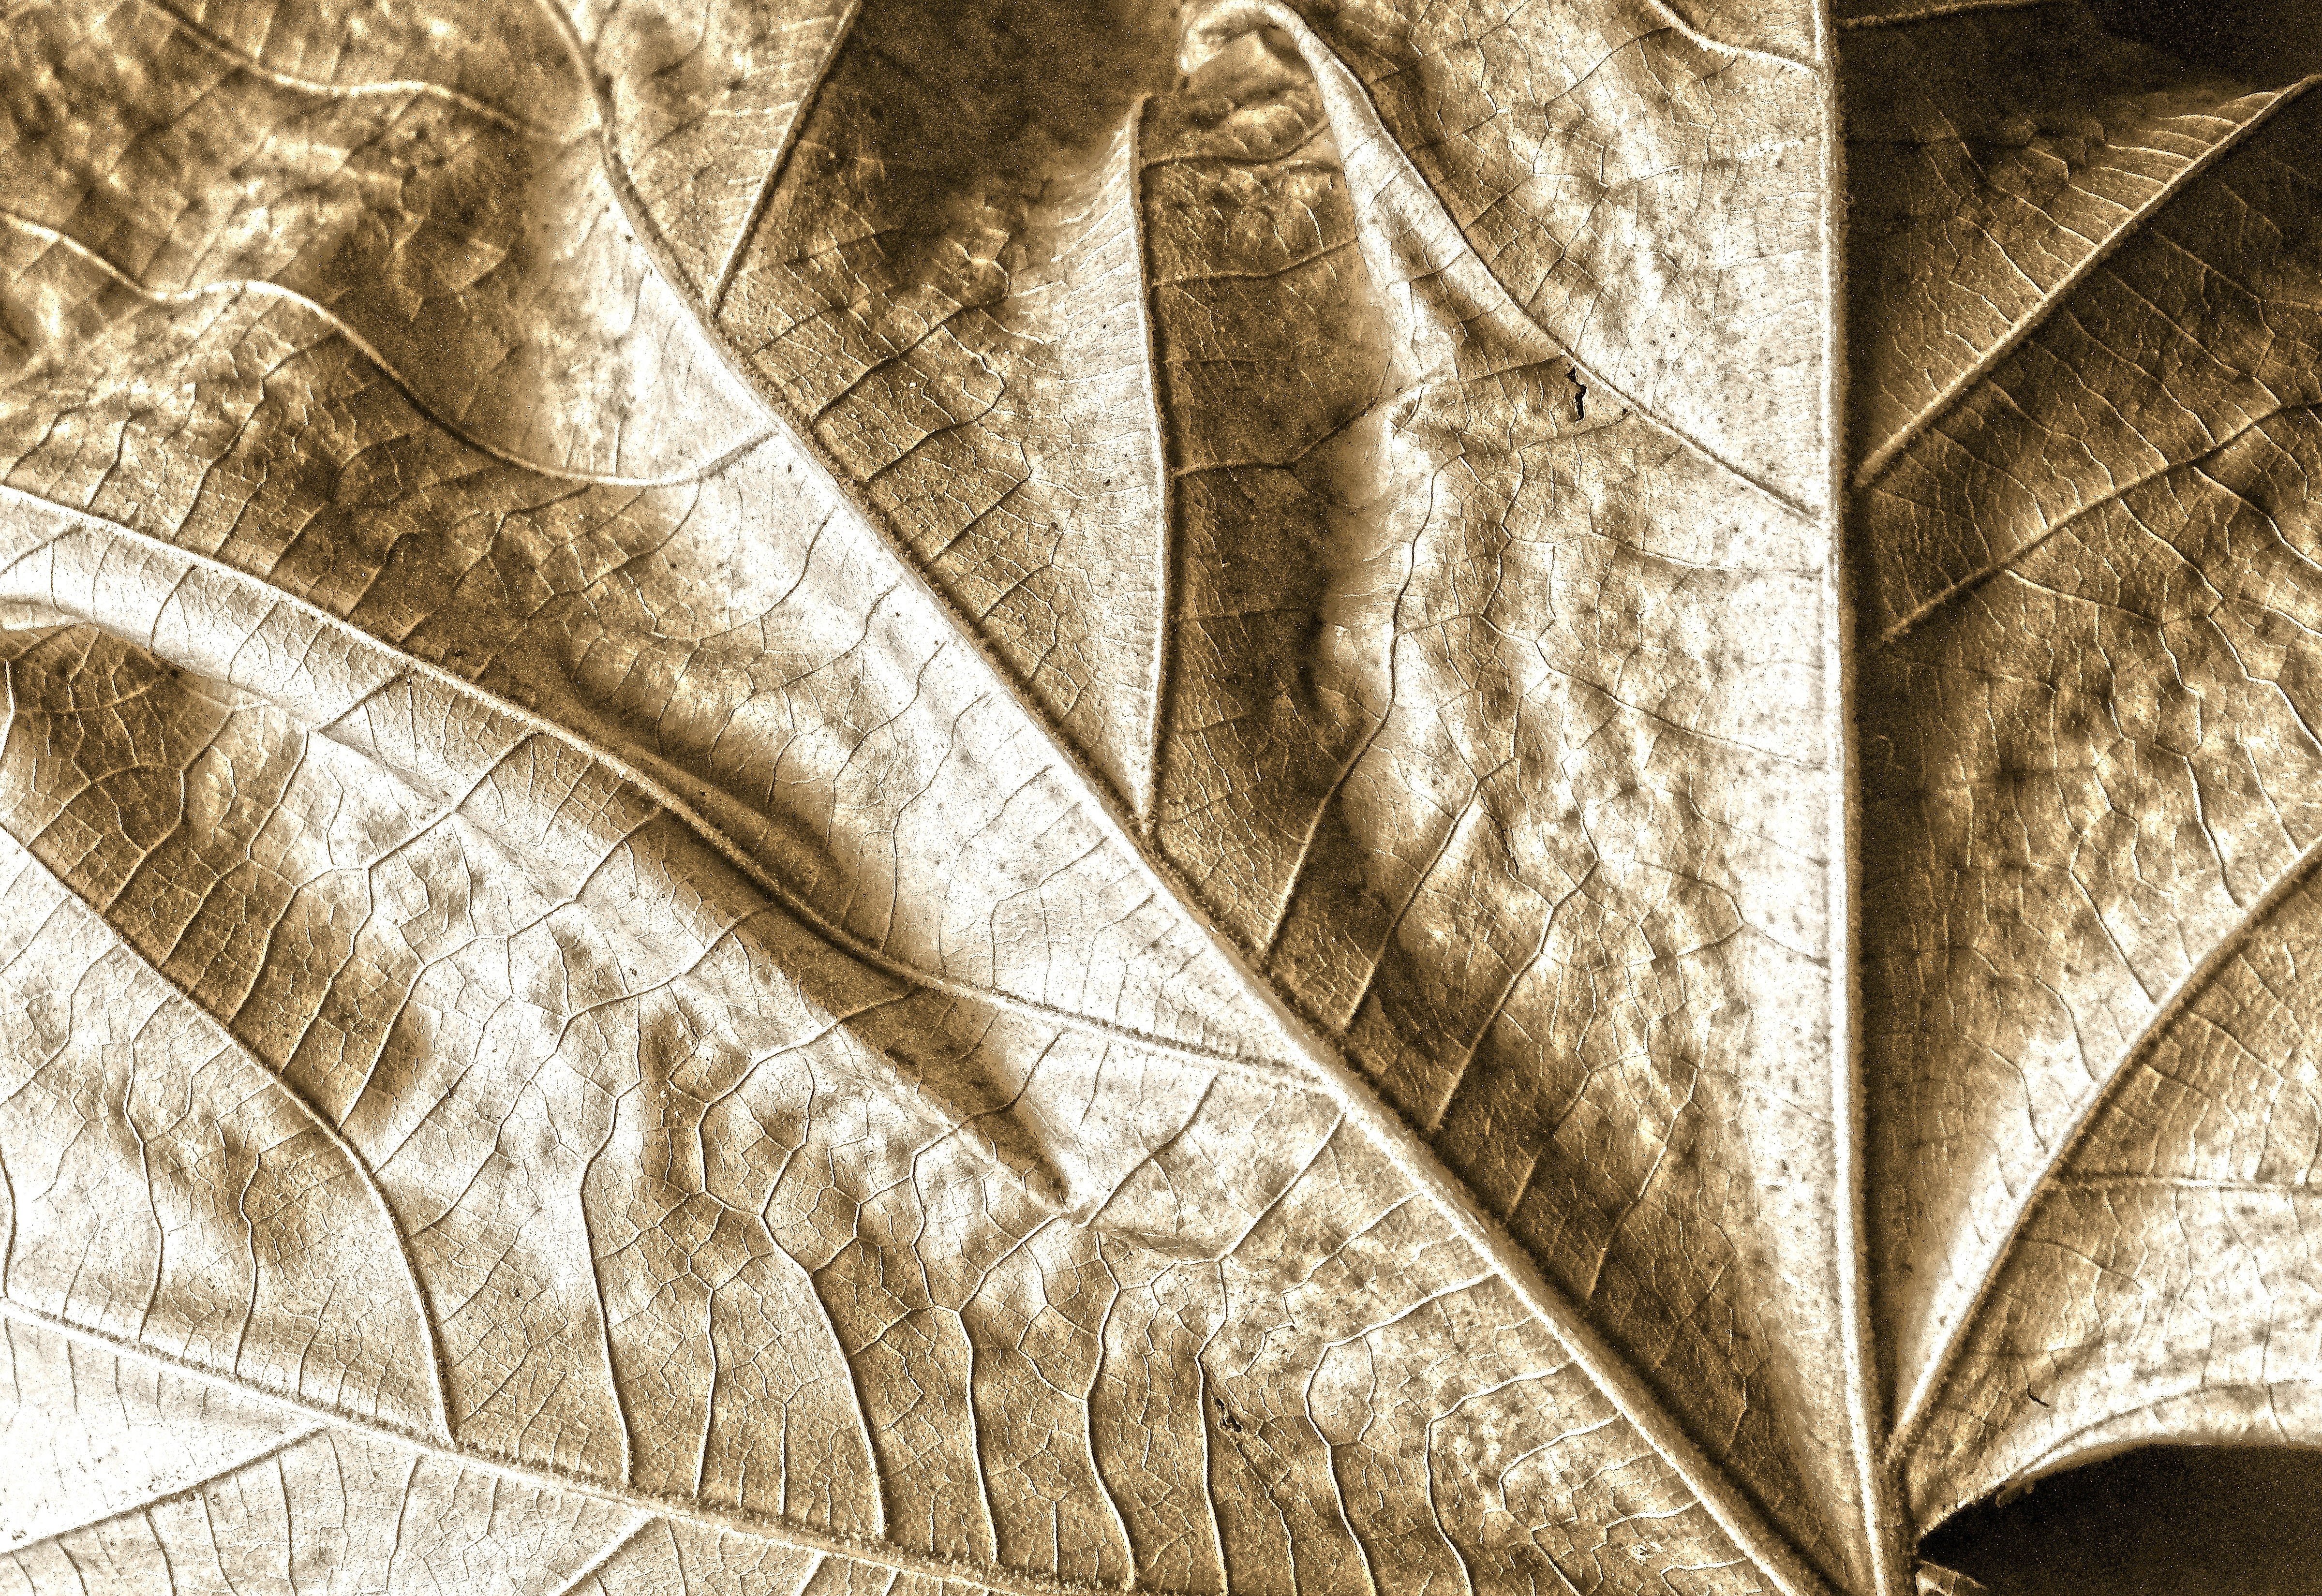 Nature, Leaf, Shadow, Dry, Autumn, backgrounds, textured